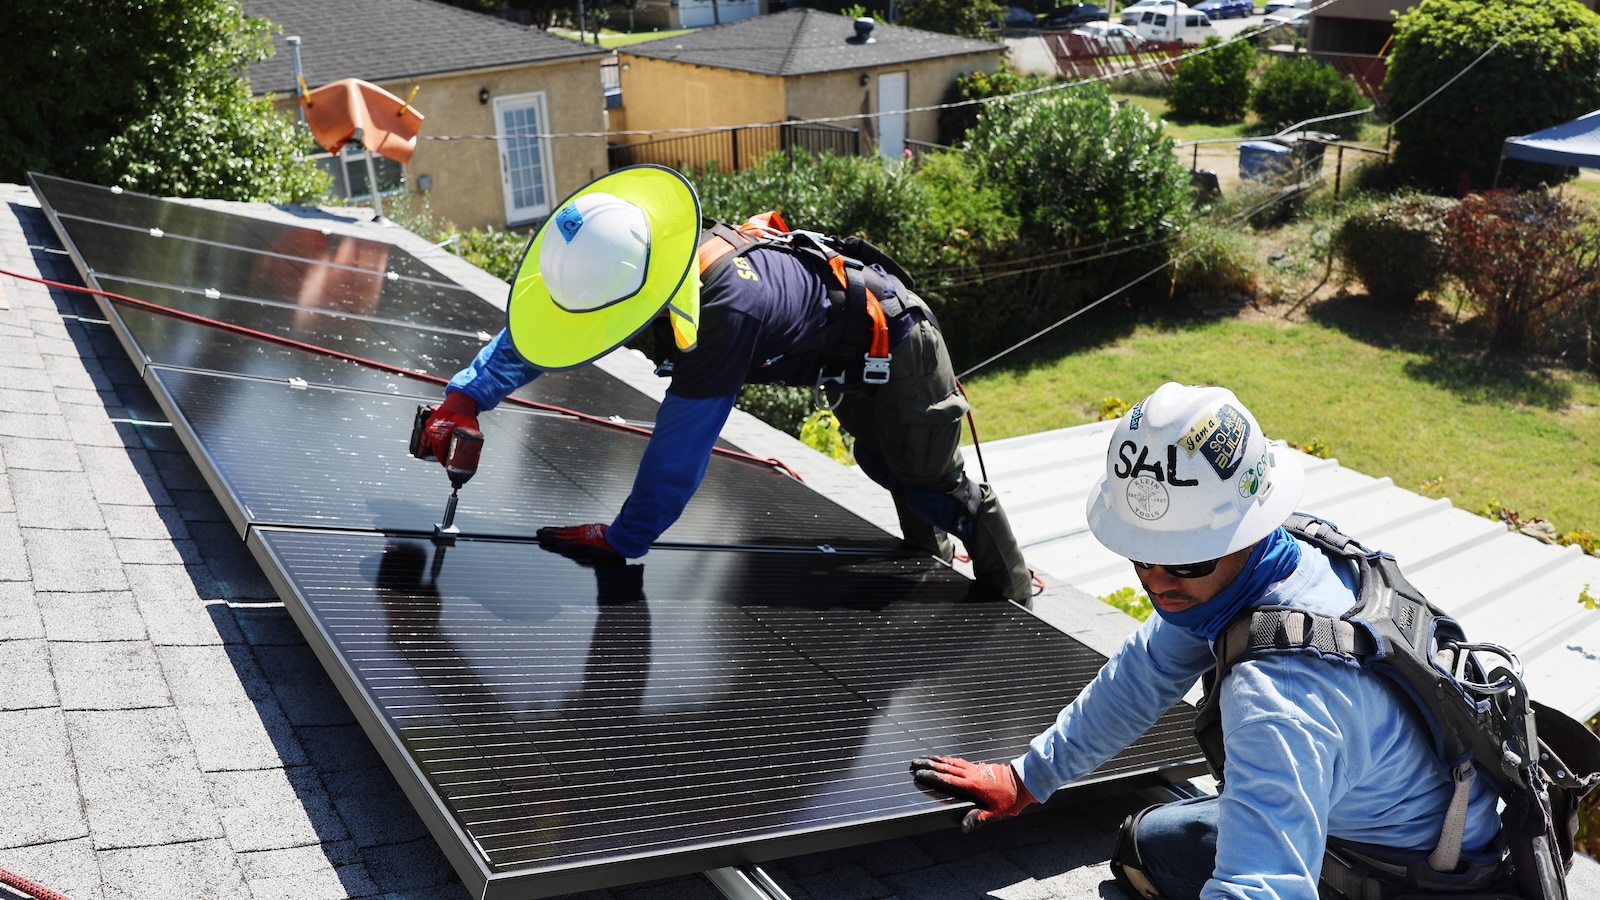 Biden’s ‘Solar for All’ awards $7B to bring affordable energy to low-income families